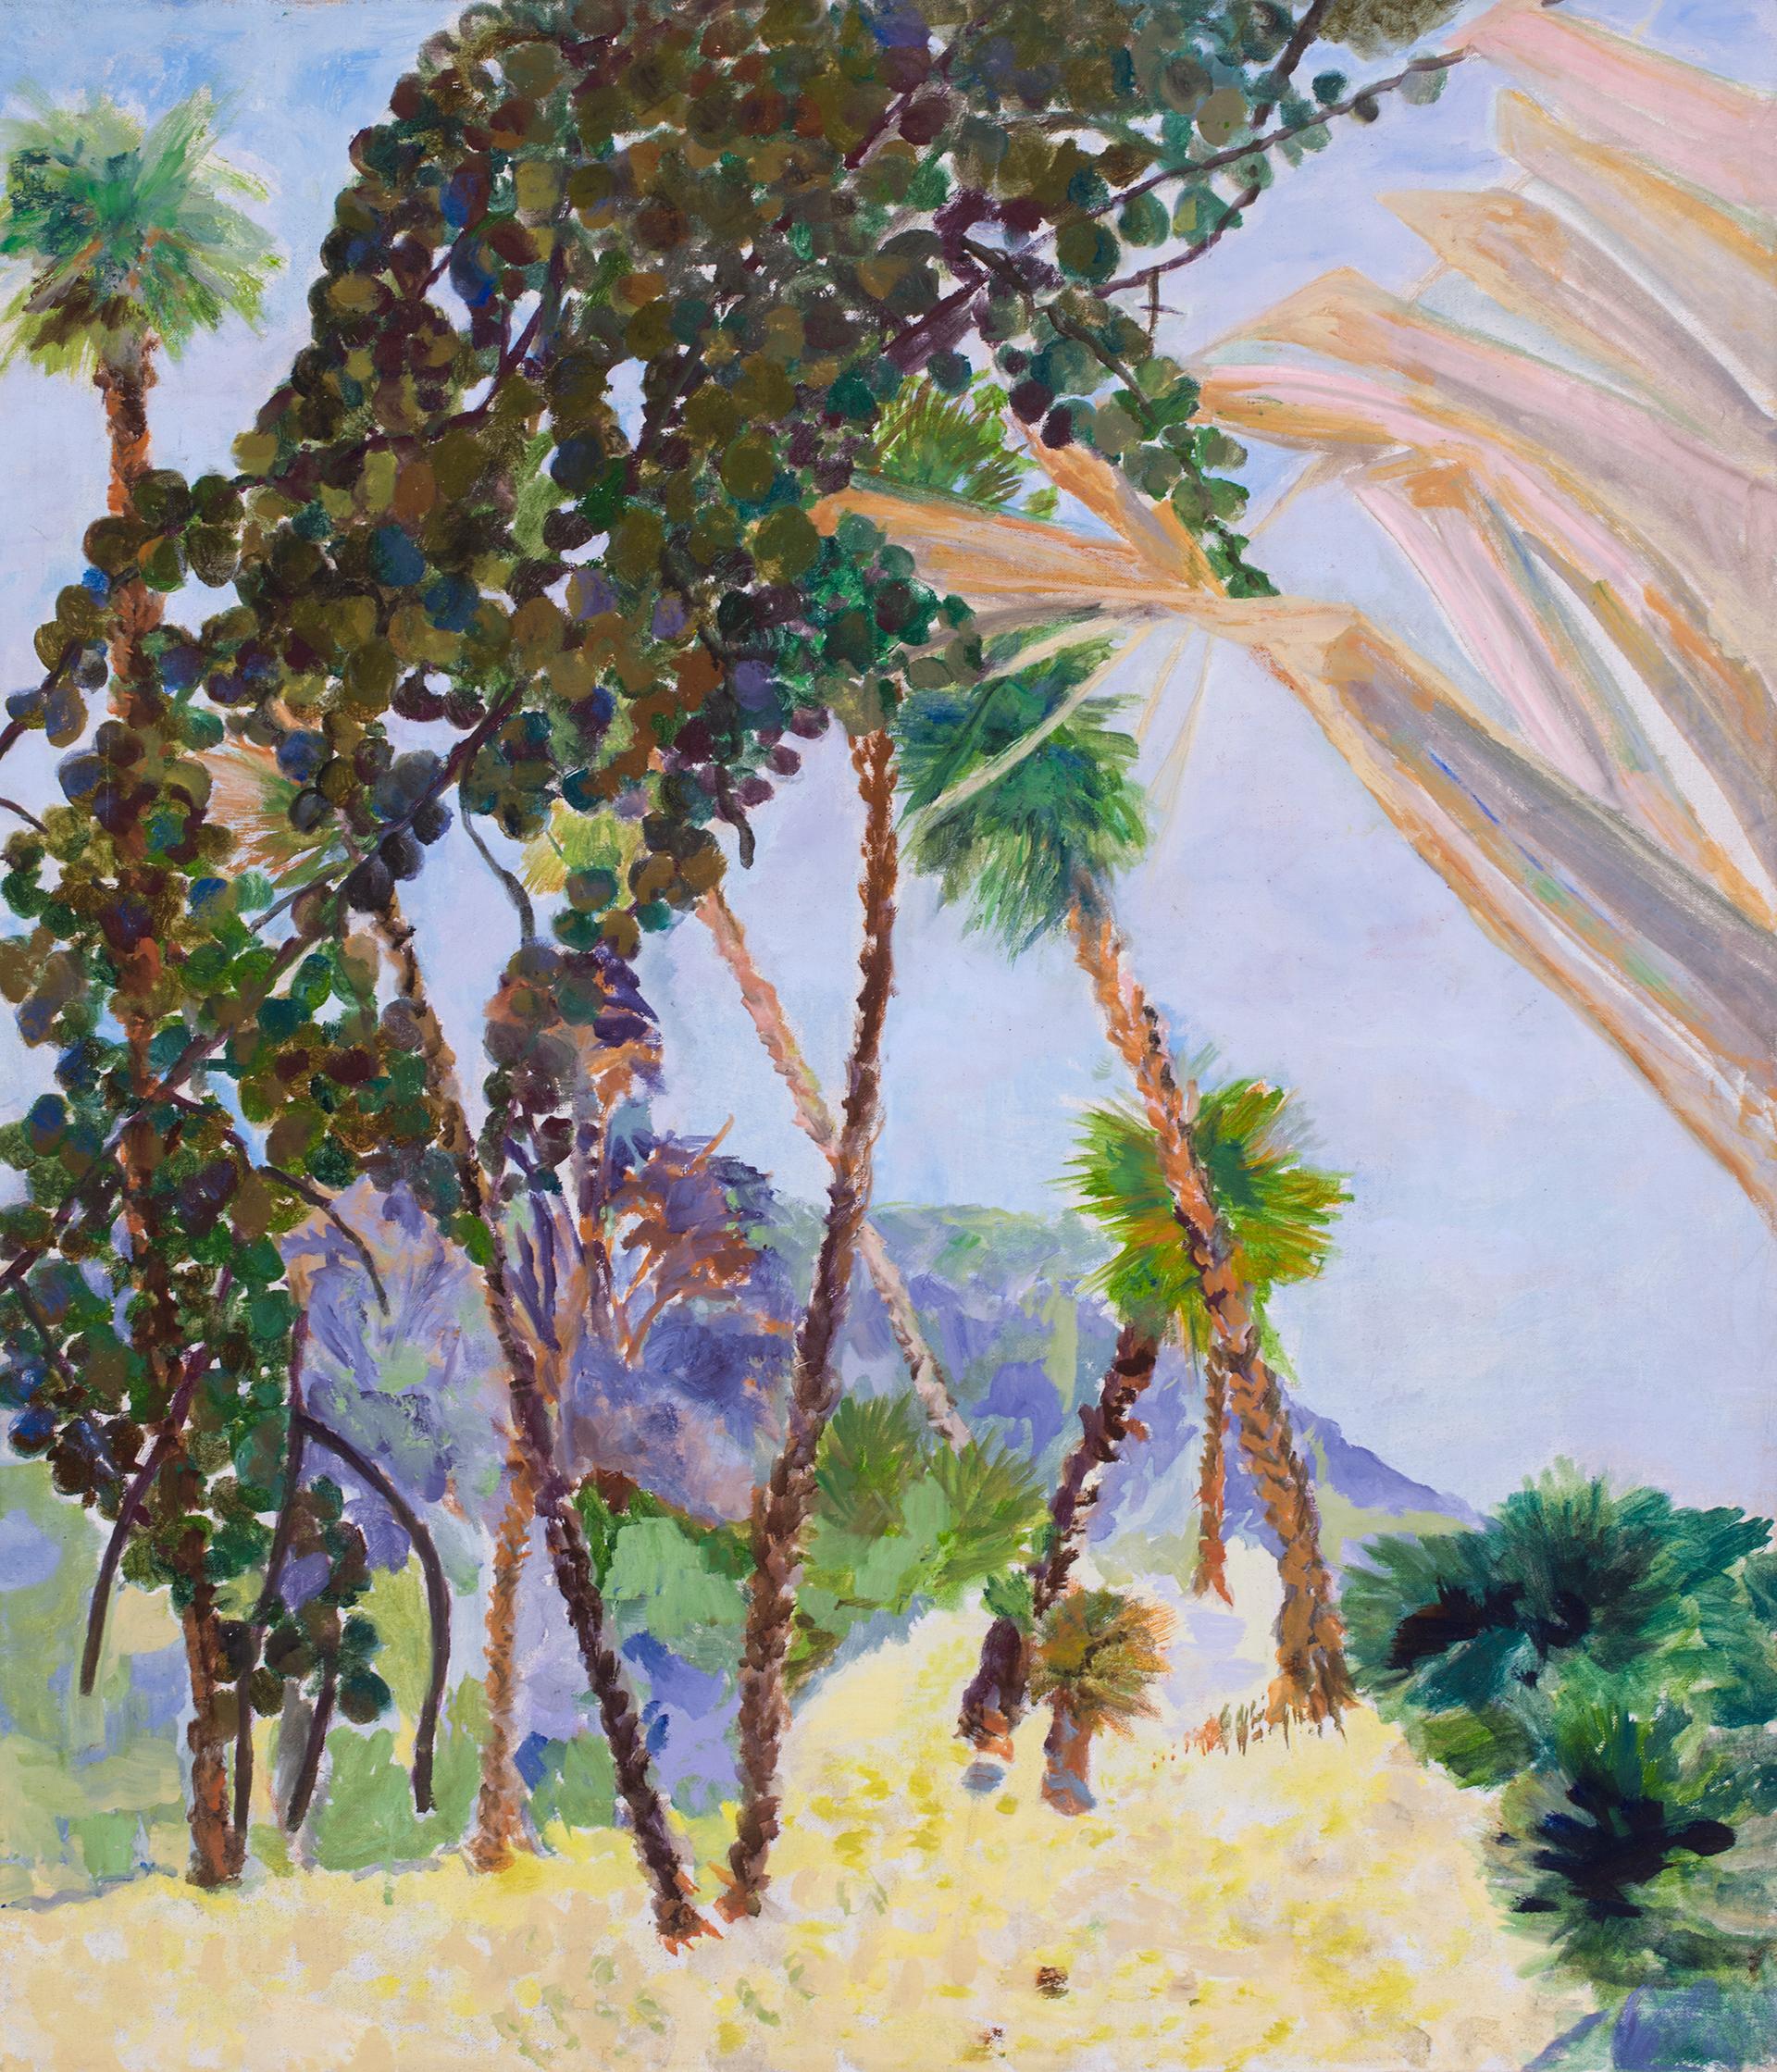 
Contemporary Oil Desert Blue Palm Fruit and Violet Hills - Landscape Painting
This painting painted on site at the Wirikuta Garden in San José del Cabo in Mexico focused on the strong olive and deep purple colored fruits that fall in huge